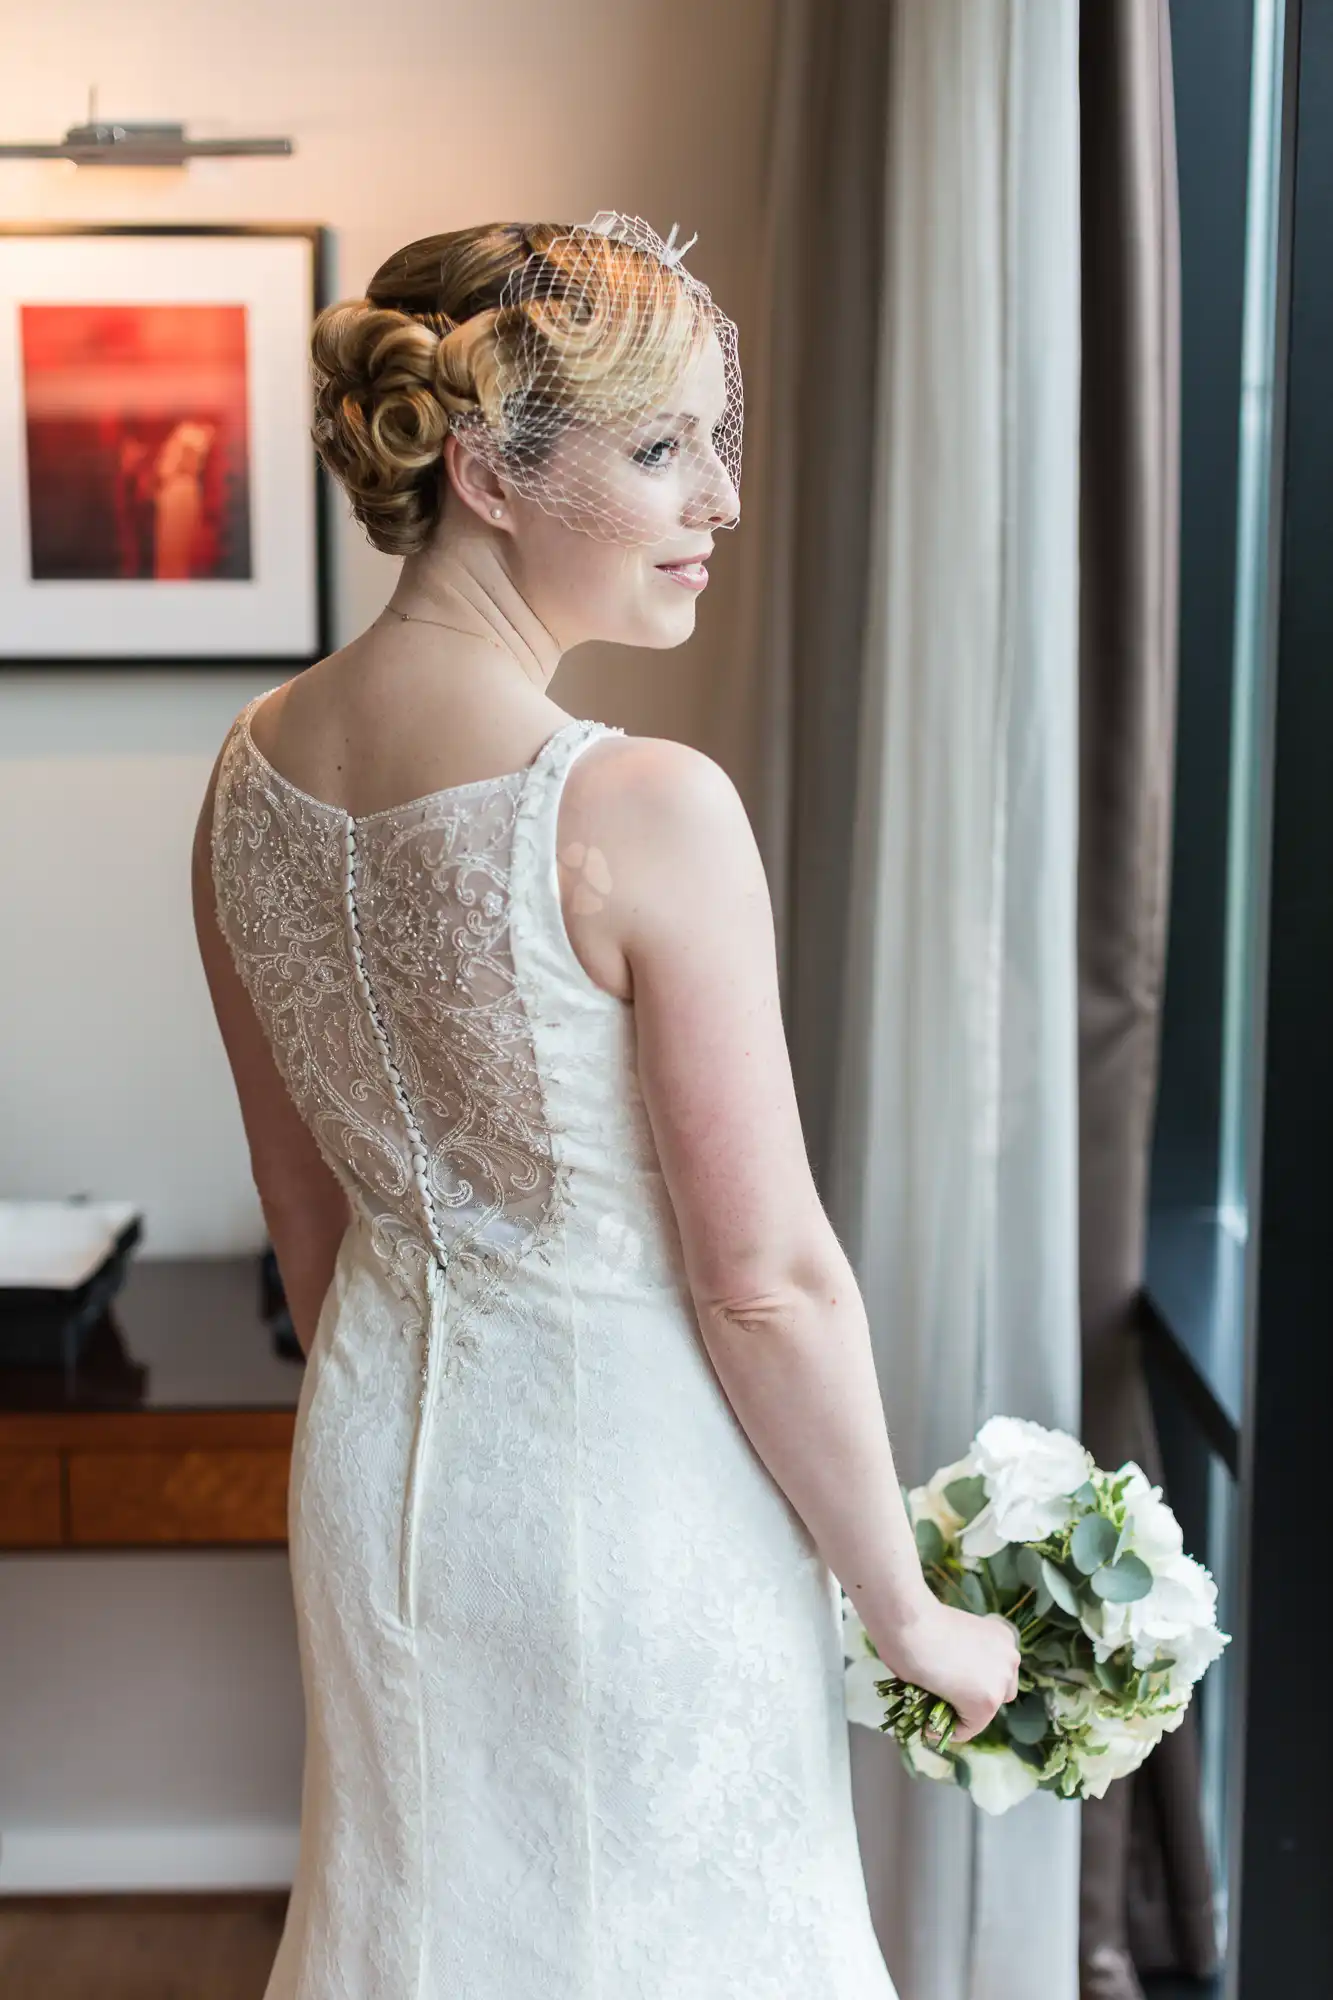 A bride in an elegant lace wedding dress looking out a window, holding a bouquet of white flowers, with a gentle smile.